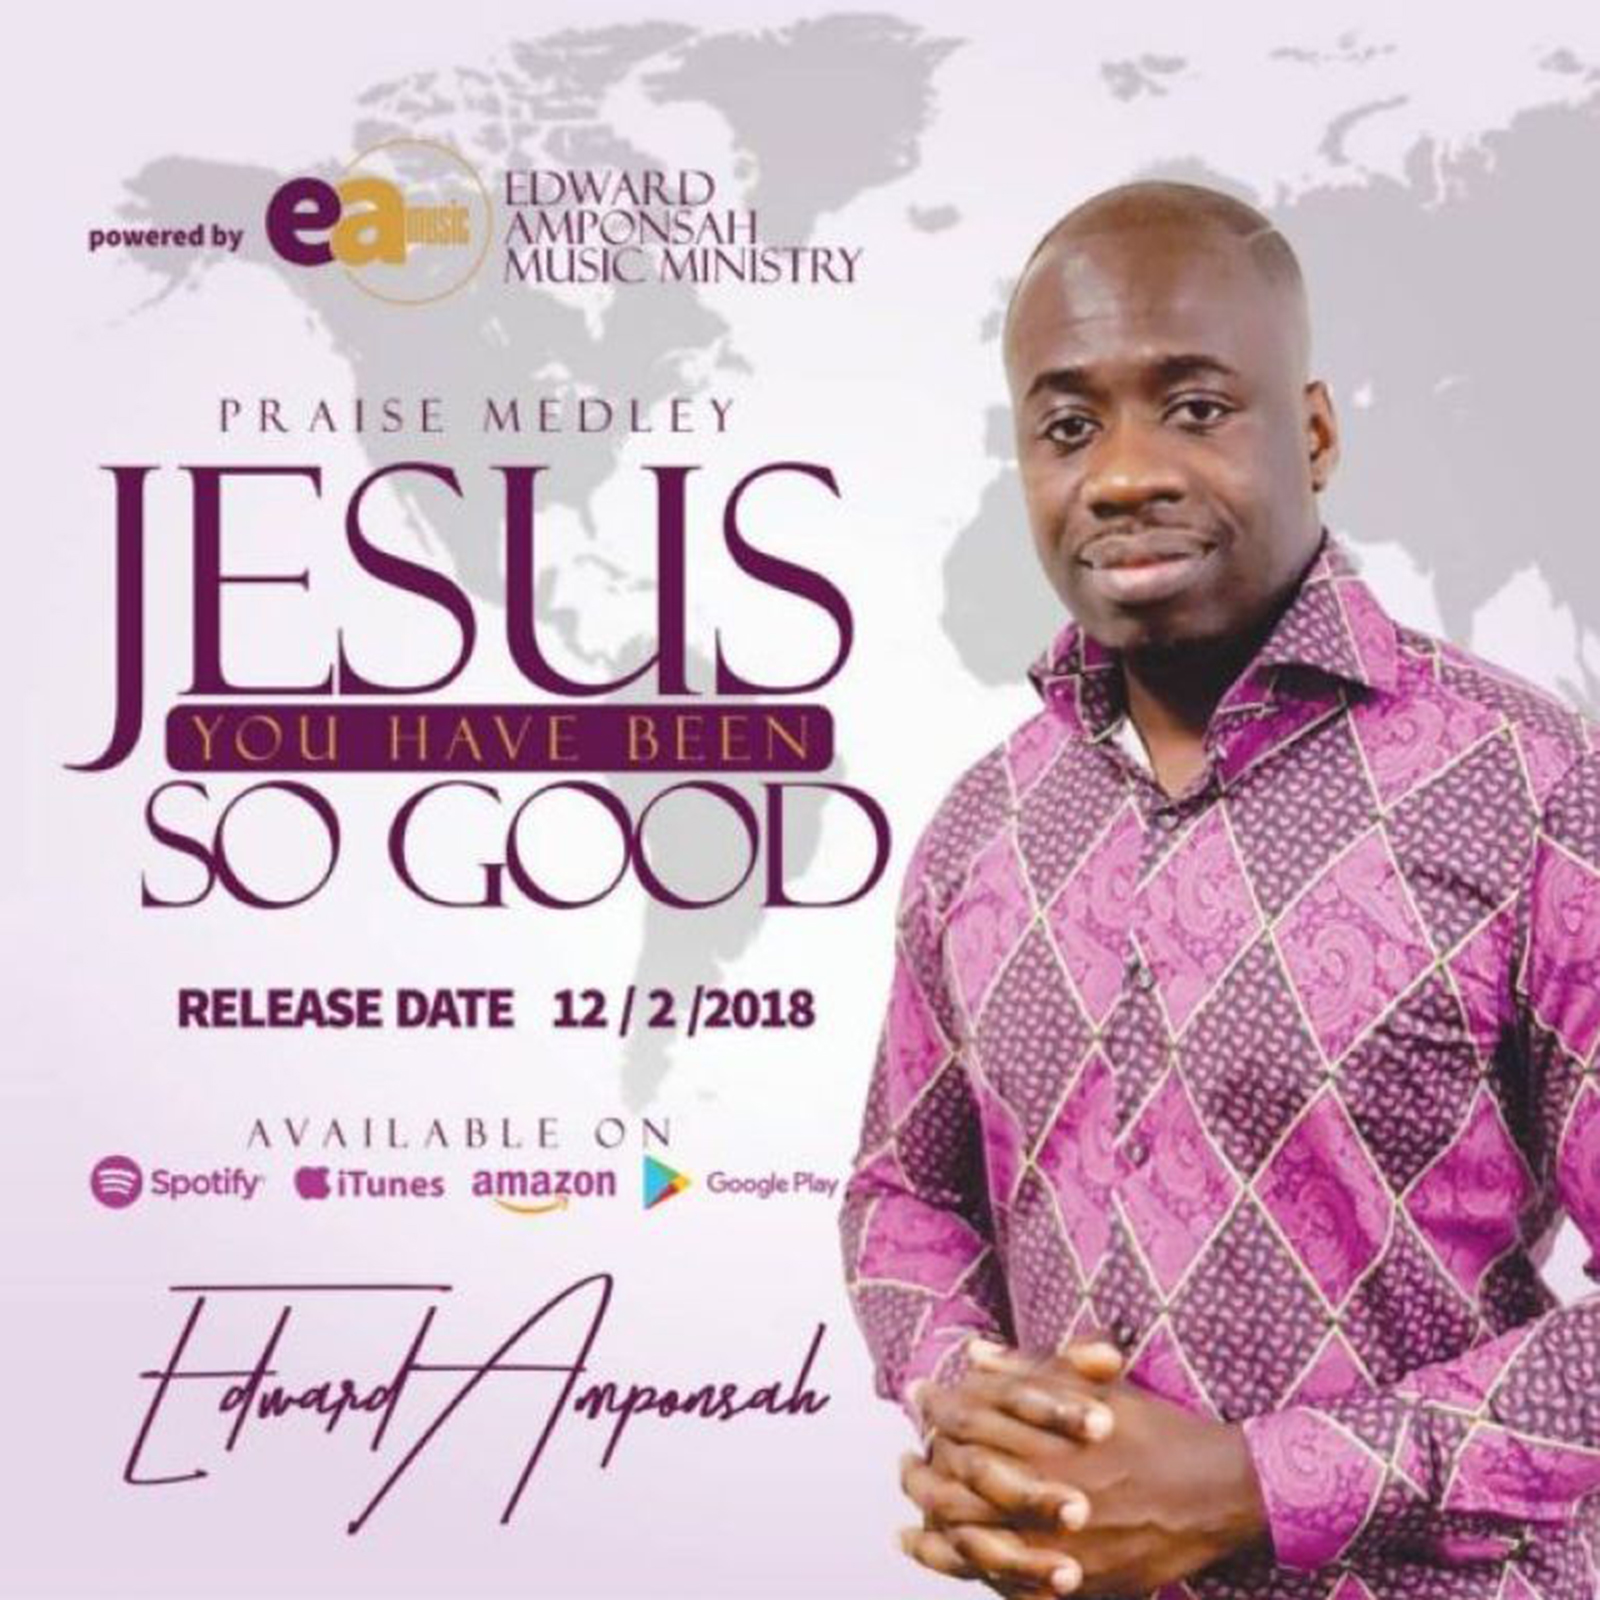 Jesus You Have Been So Good (Praise Medley) by Edward Amponsah